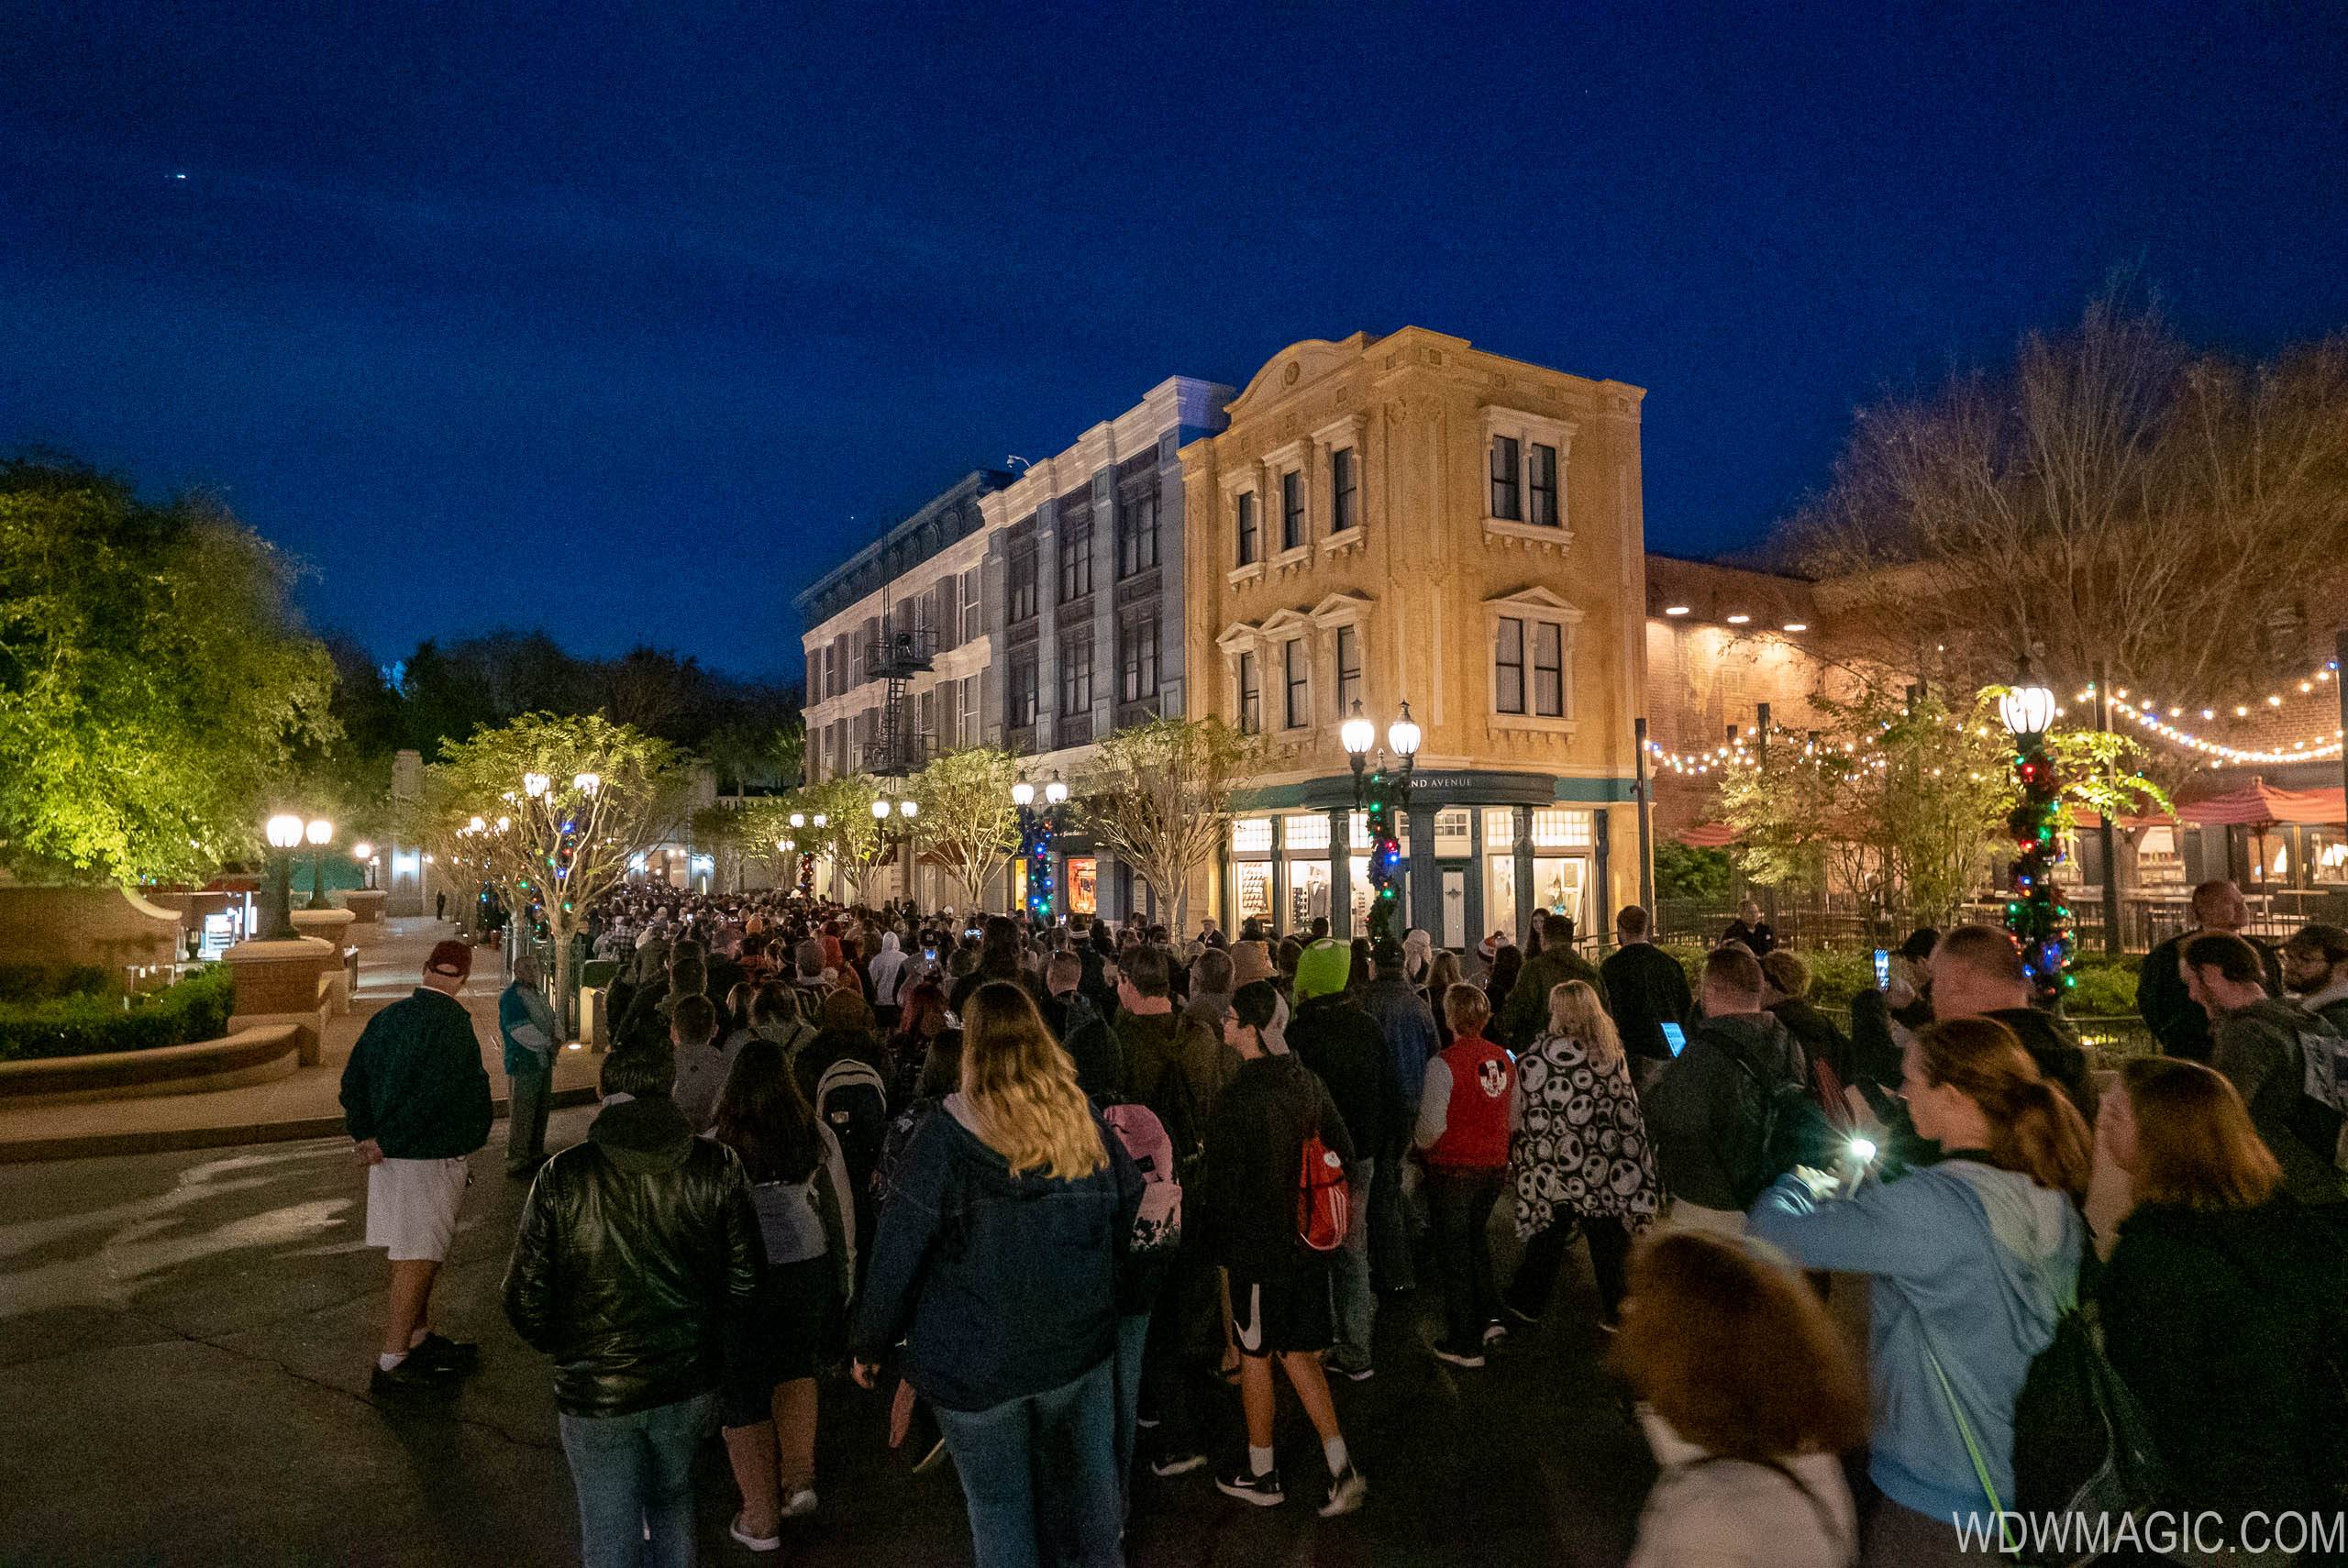 Opening day in December 2019